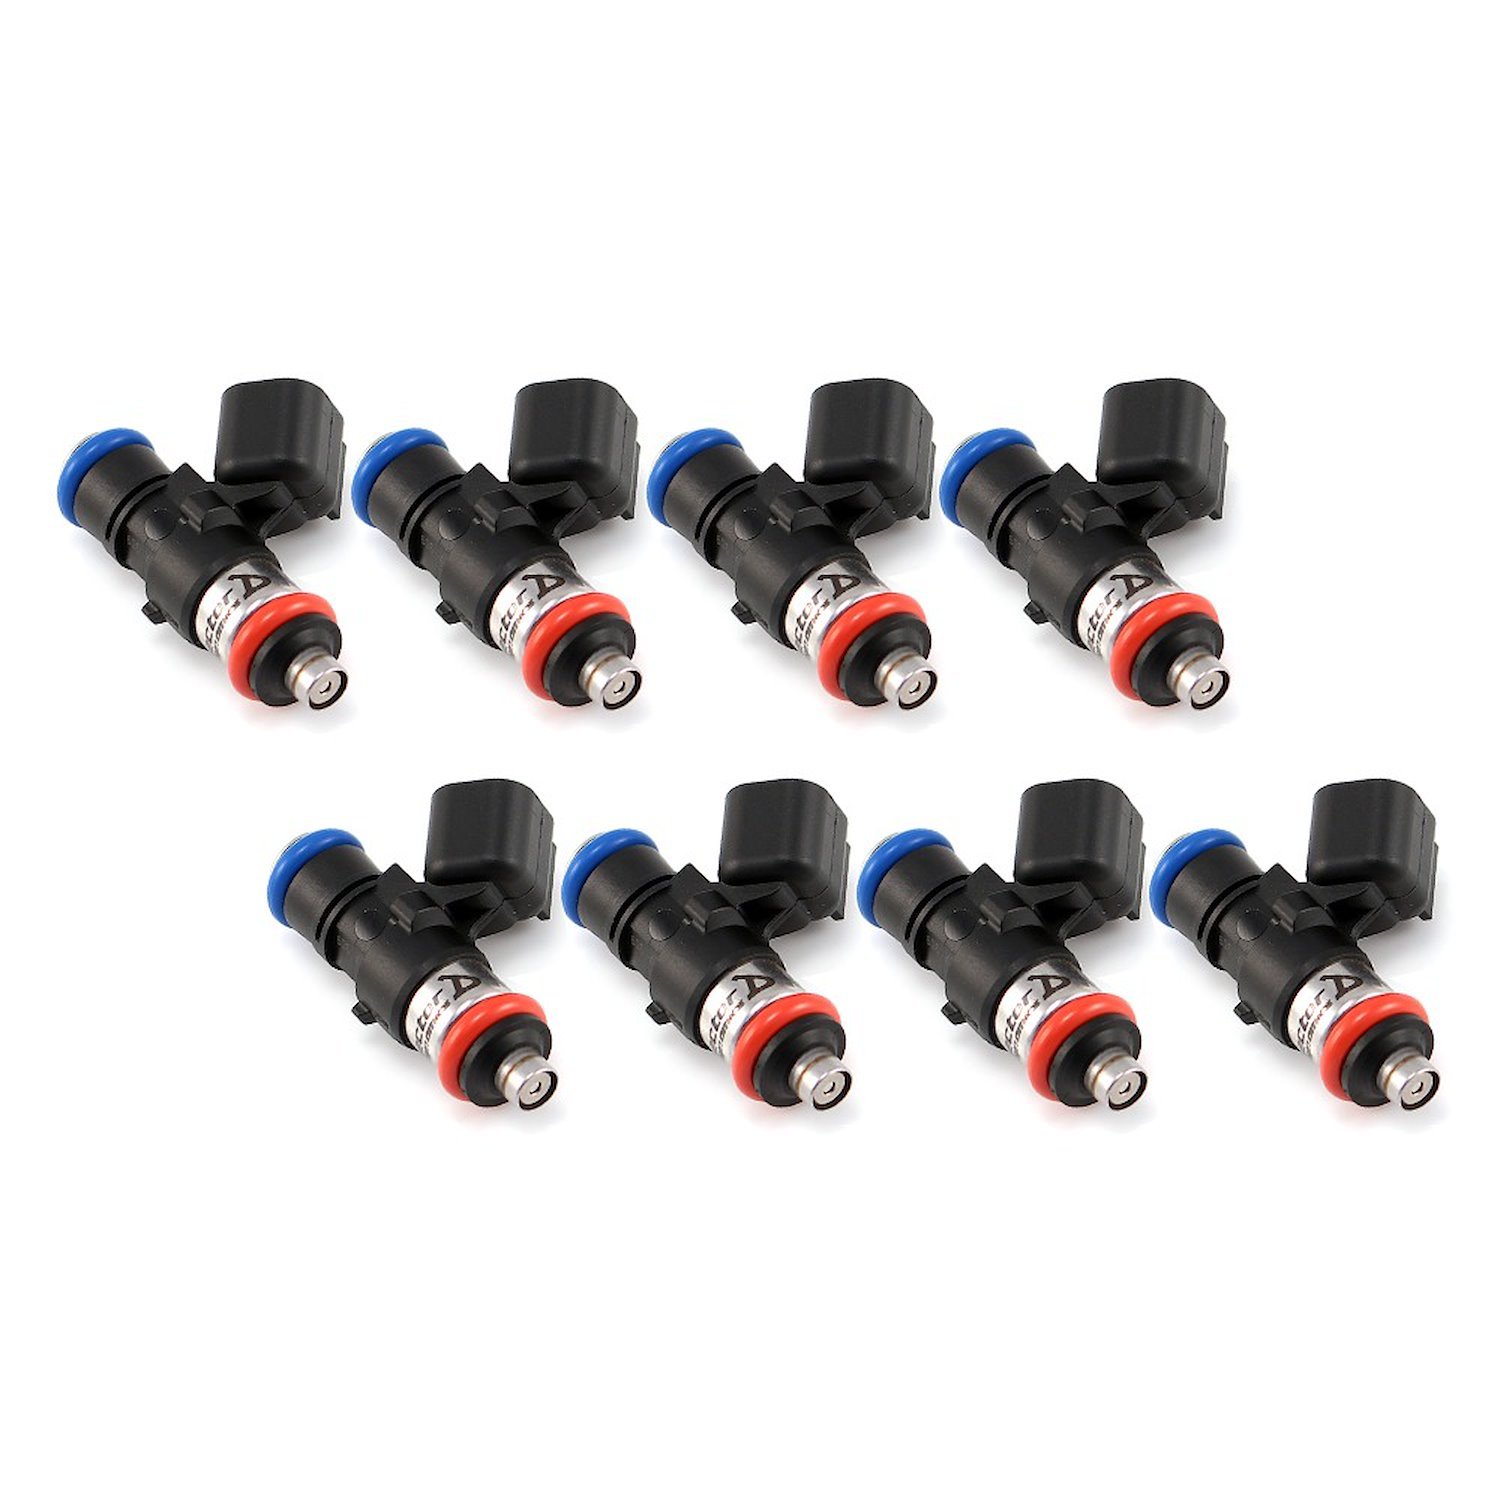 2600.34.14.15.8 2600cc Fuel Injector Set, 34 mm Length, 14 mm Top, 15 mm Lower O-Ring